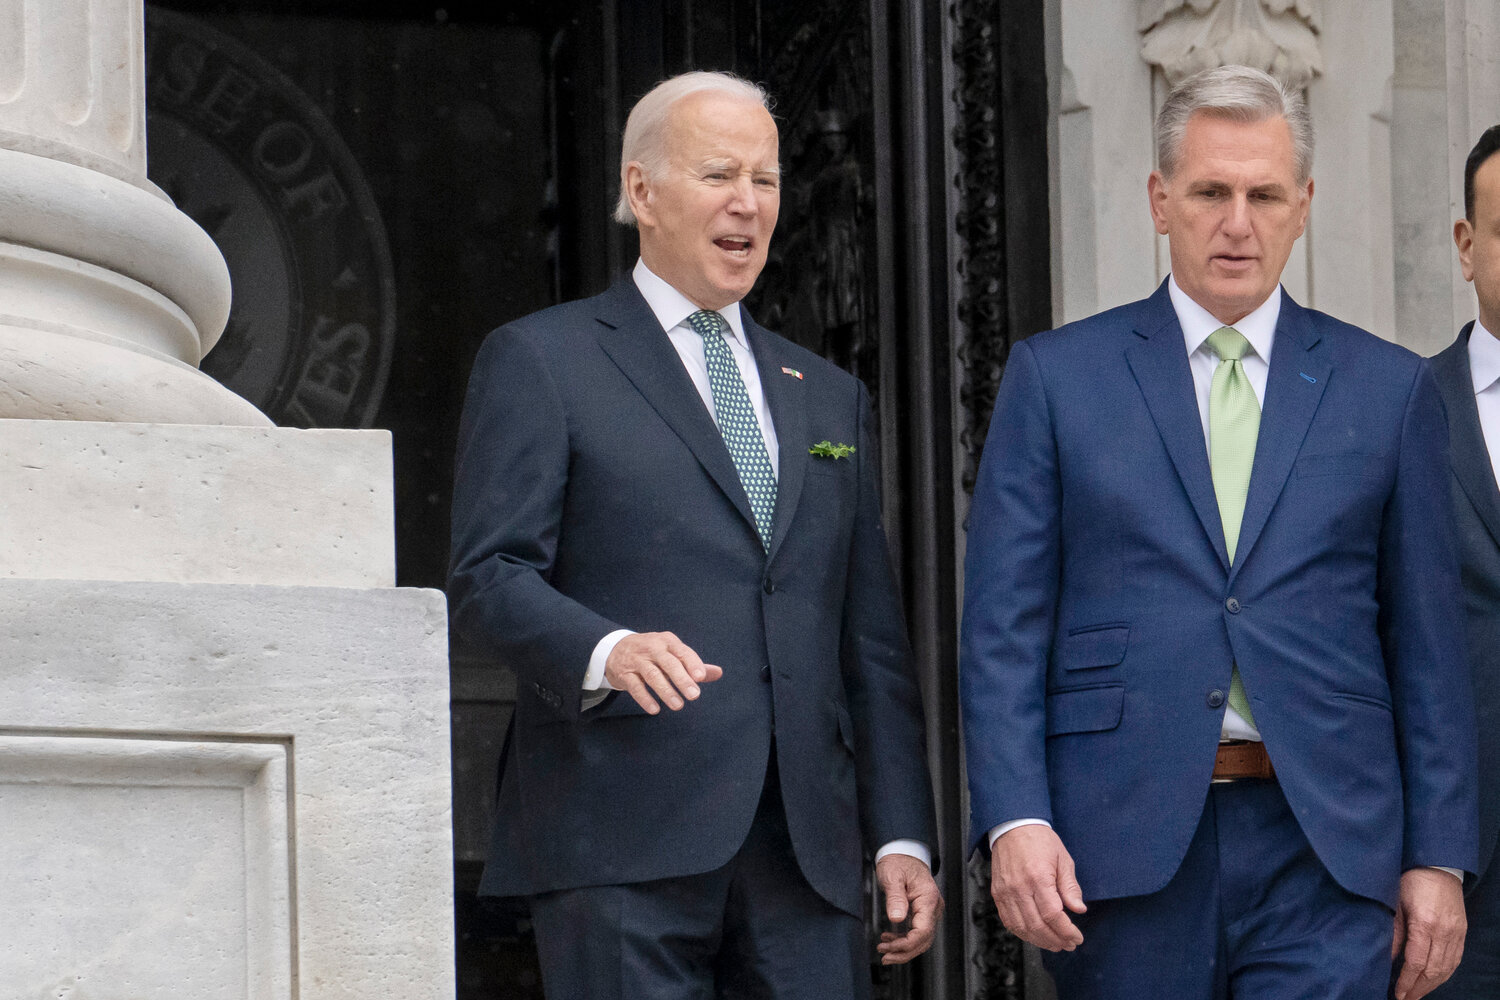 FILE - President Joe Biden talks with House Speaker Kevin McCarthy, R-Calif., as he departs the Capitol following the annual St. Patrick's Day gathering, in Washington, March 17, 2023. Facing the risk of a federal government default as soon as June 1, President Joe Biden has invited the top four congressional leaders to a White House meeting on May 9 for talks. Itâs the first concrete step toward negotiations on averting a potential economic catastrophe, but thereâs a long way to go: Biden and Republicans canât even agree on whatâs up for negotiation.  (AP Photo/J. Scott Applewhite, File)